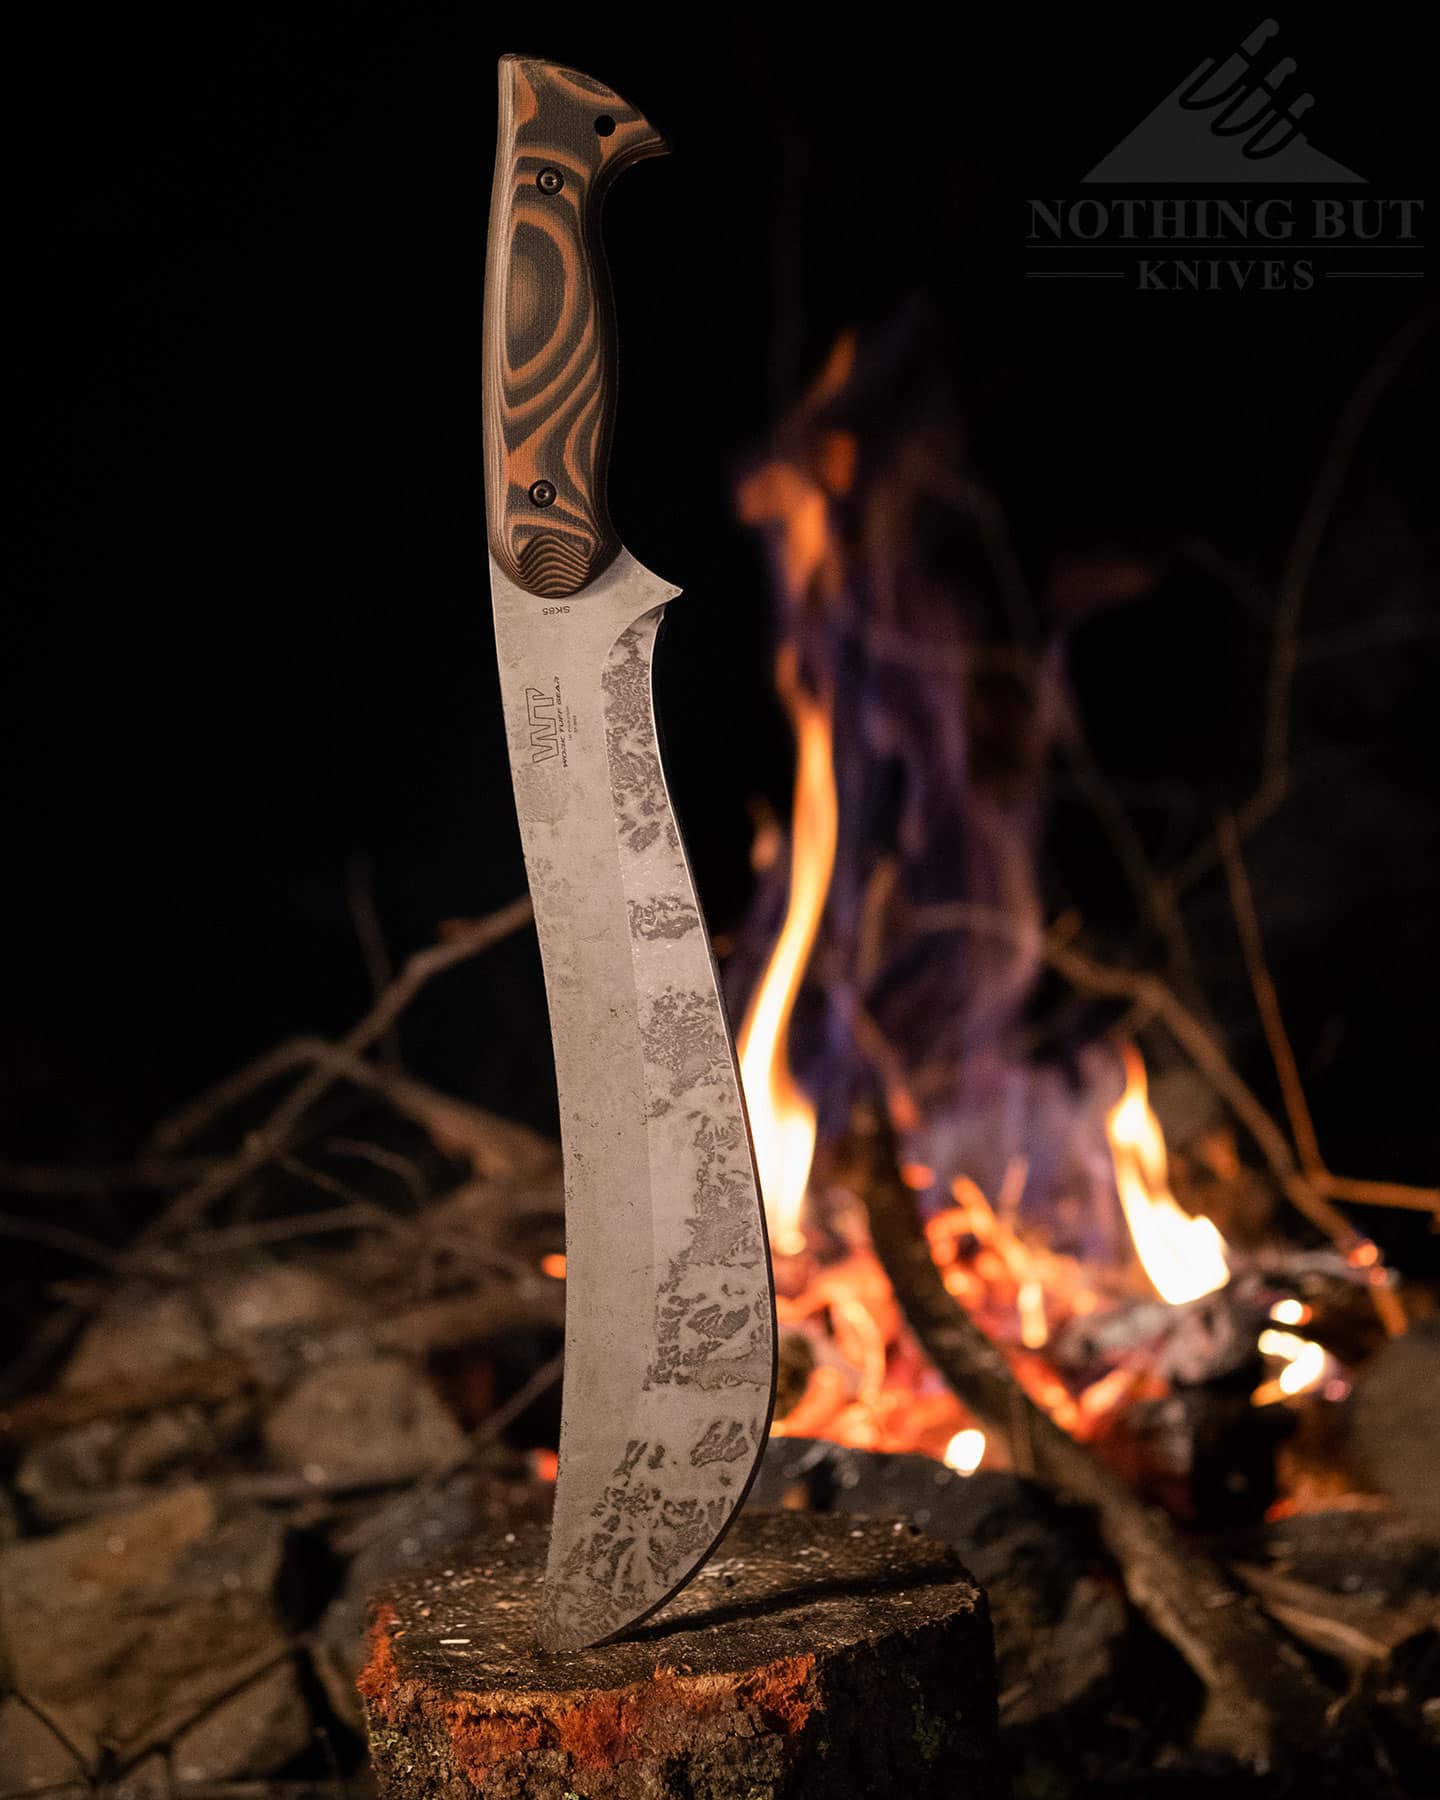 The Work-Tuff Gear Apex won a Drunken Hillbilly knife award for The Best Knife For Feuding With The Family in the Next Holler.